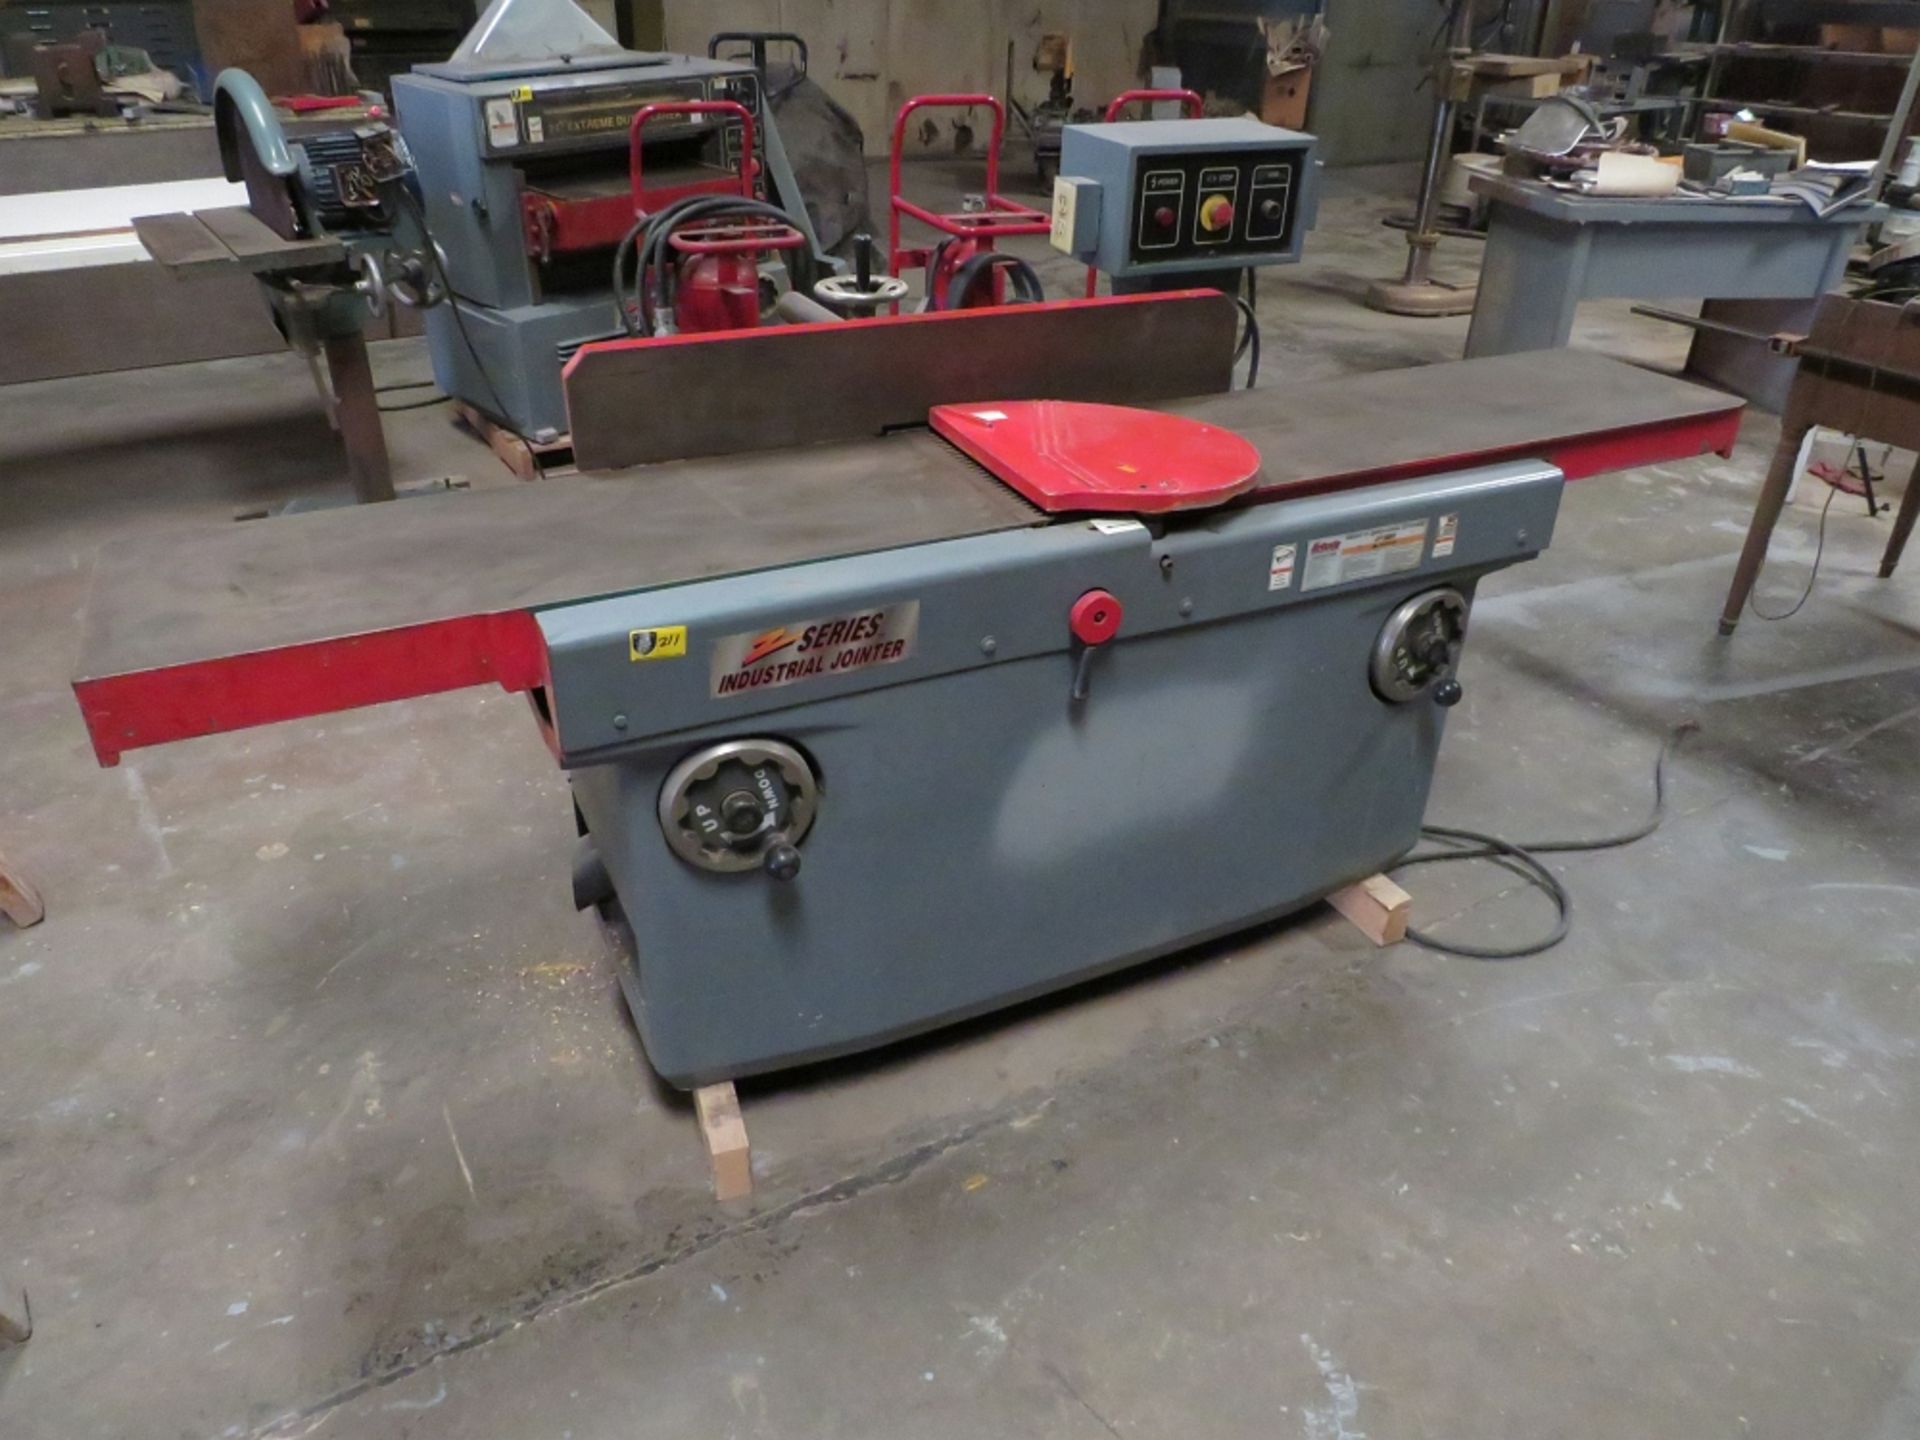 Grizzly Jointer, 16", Mdl G99532XF, w/ Spiral Cutter Head